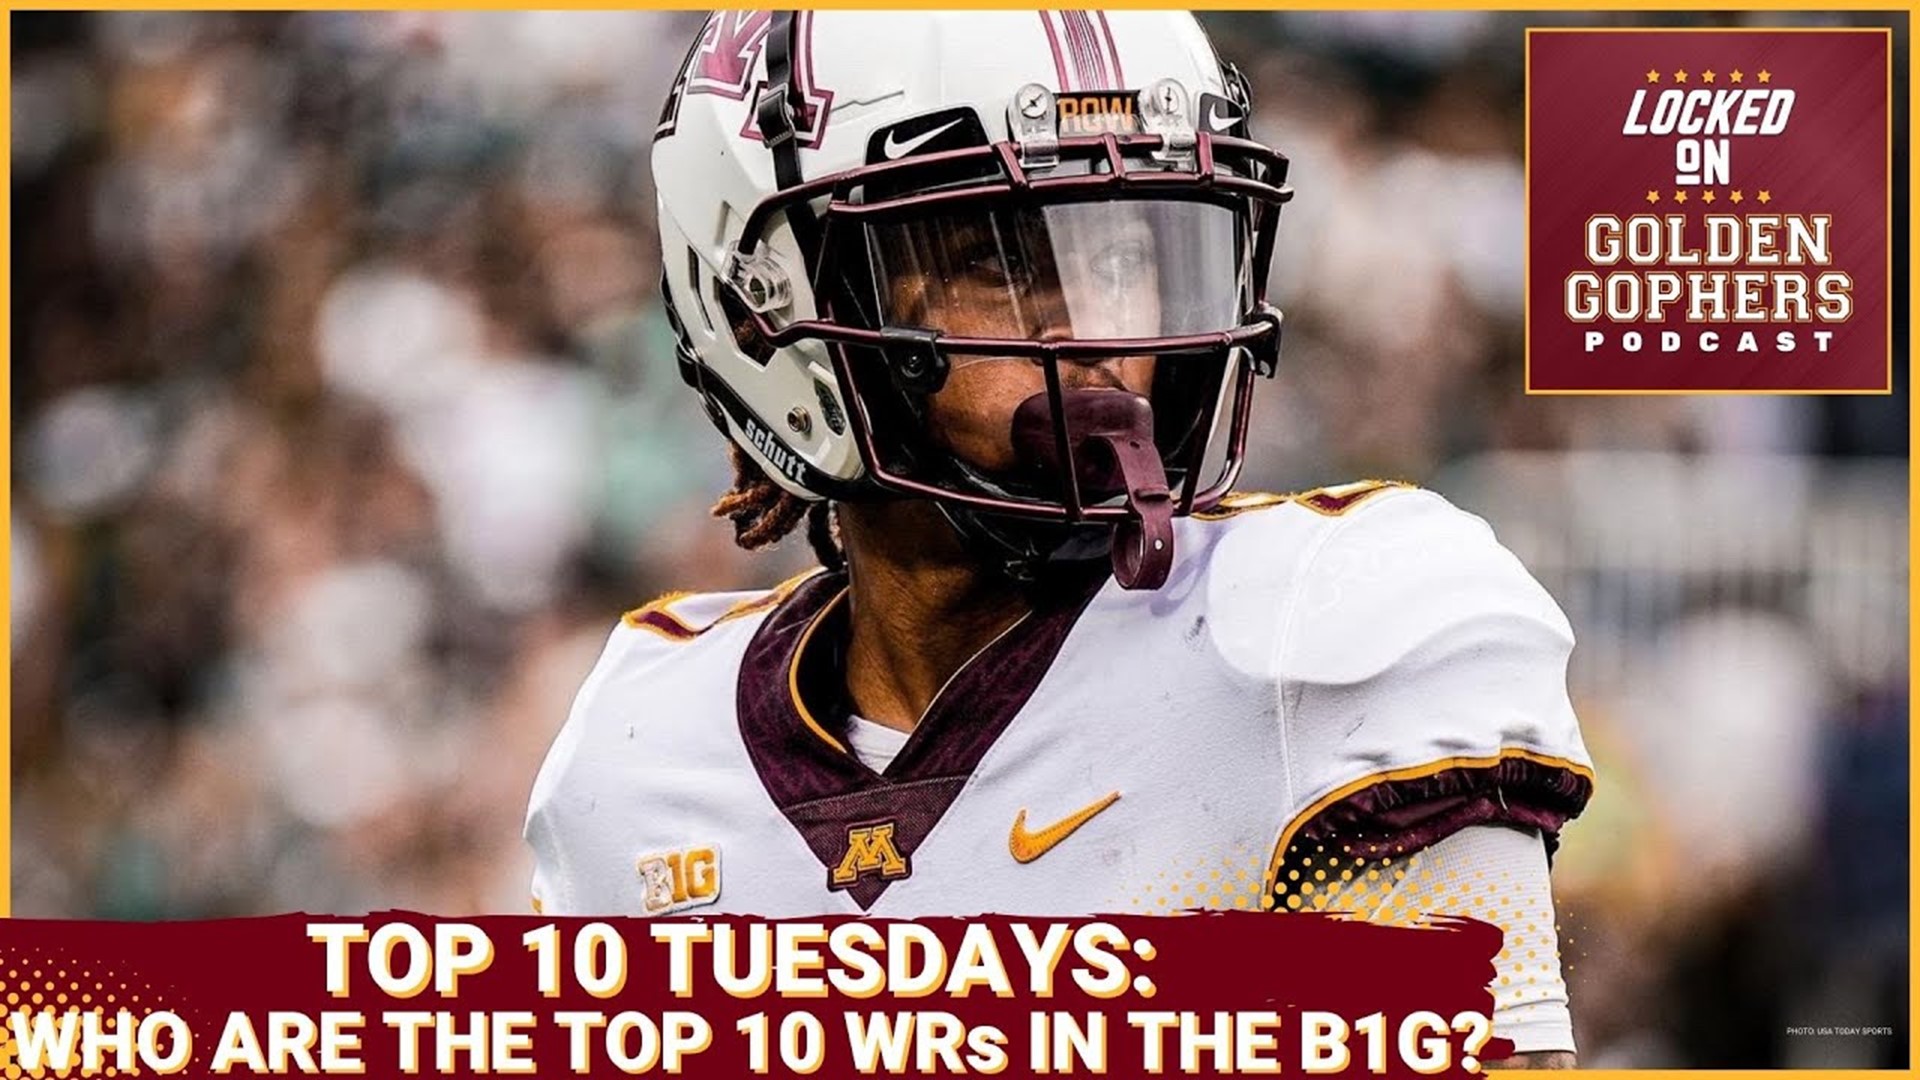 On today's show we talk about Gopher legend Tyler Johnson who is on the move in the NFL. We the discuss the top 10 wide receivers in the Big Ten conference